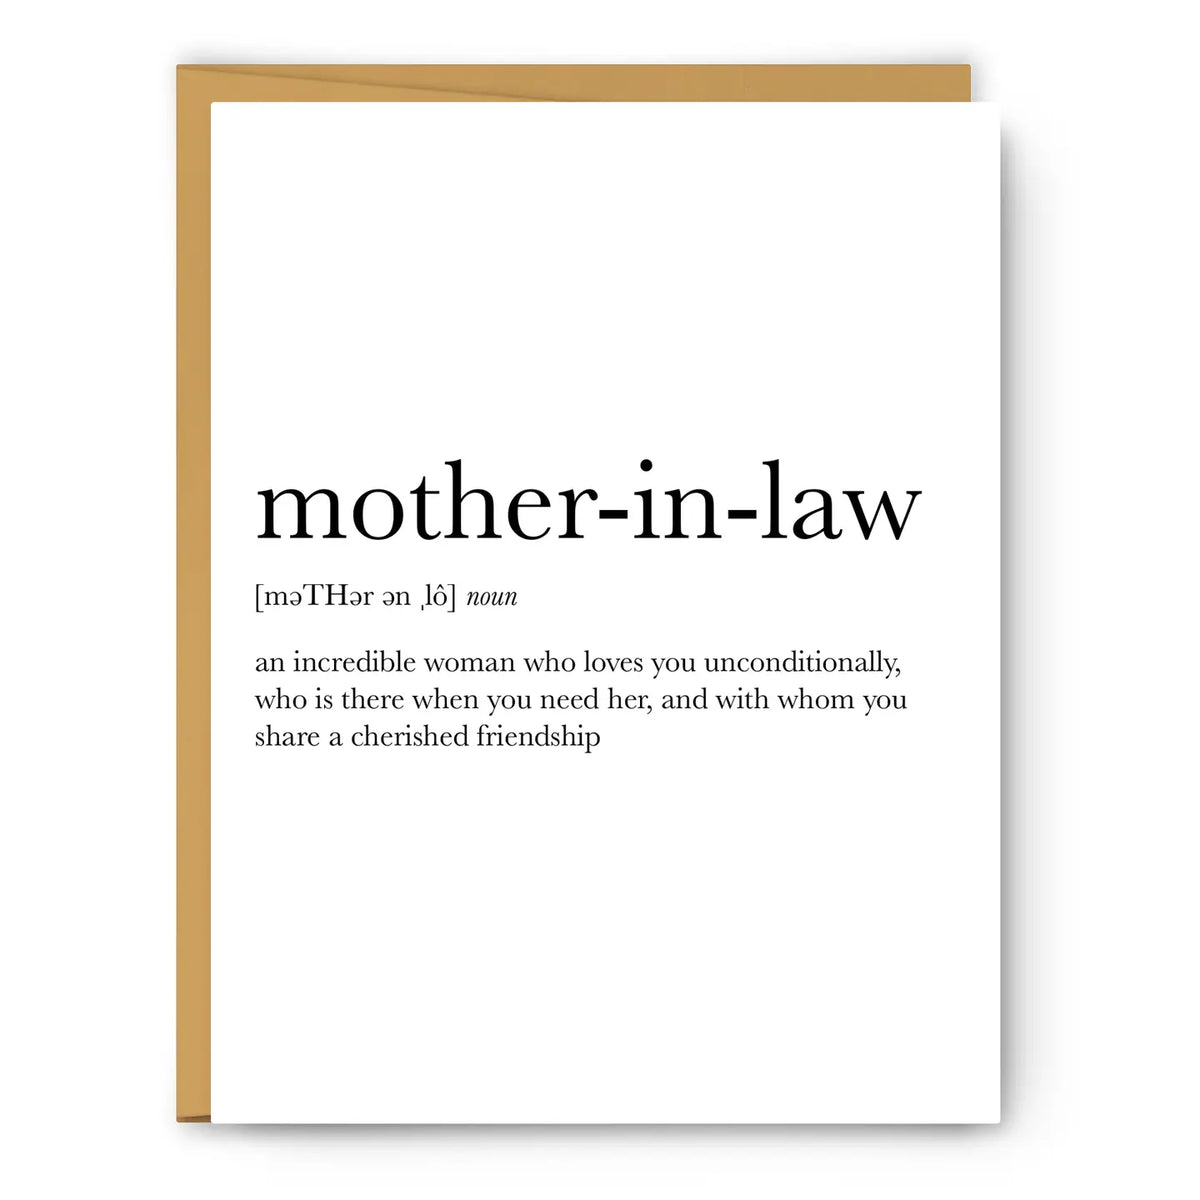 Mother-in-law Definition Mother's Day Card